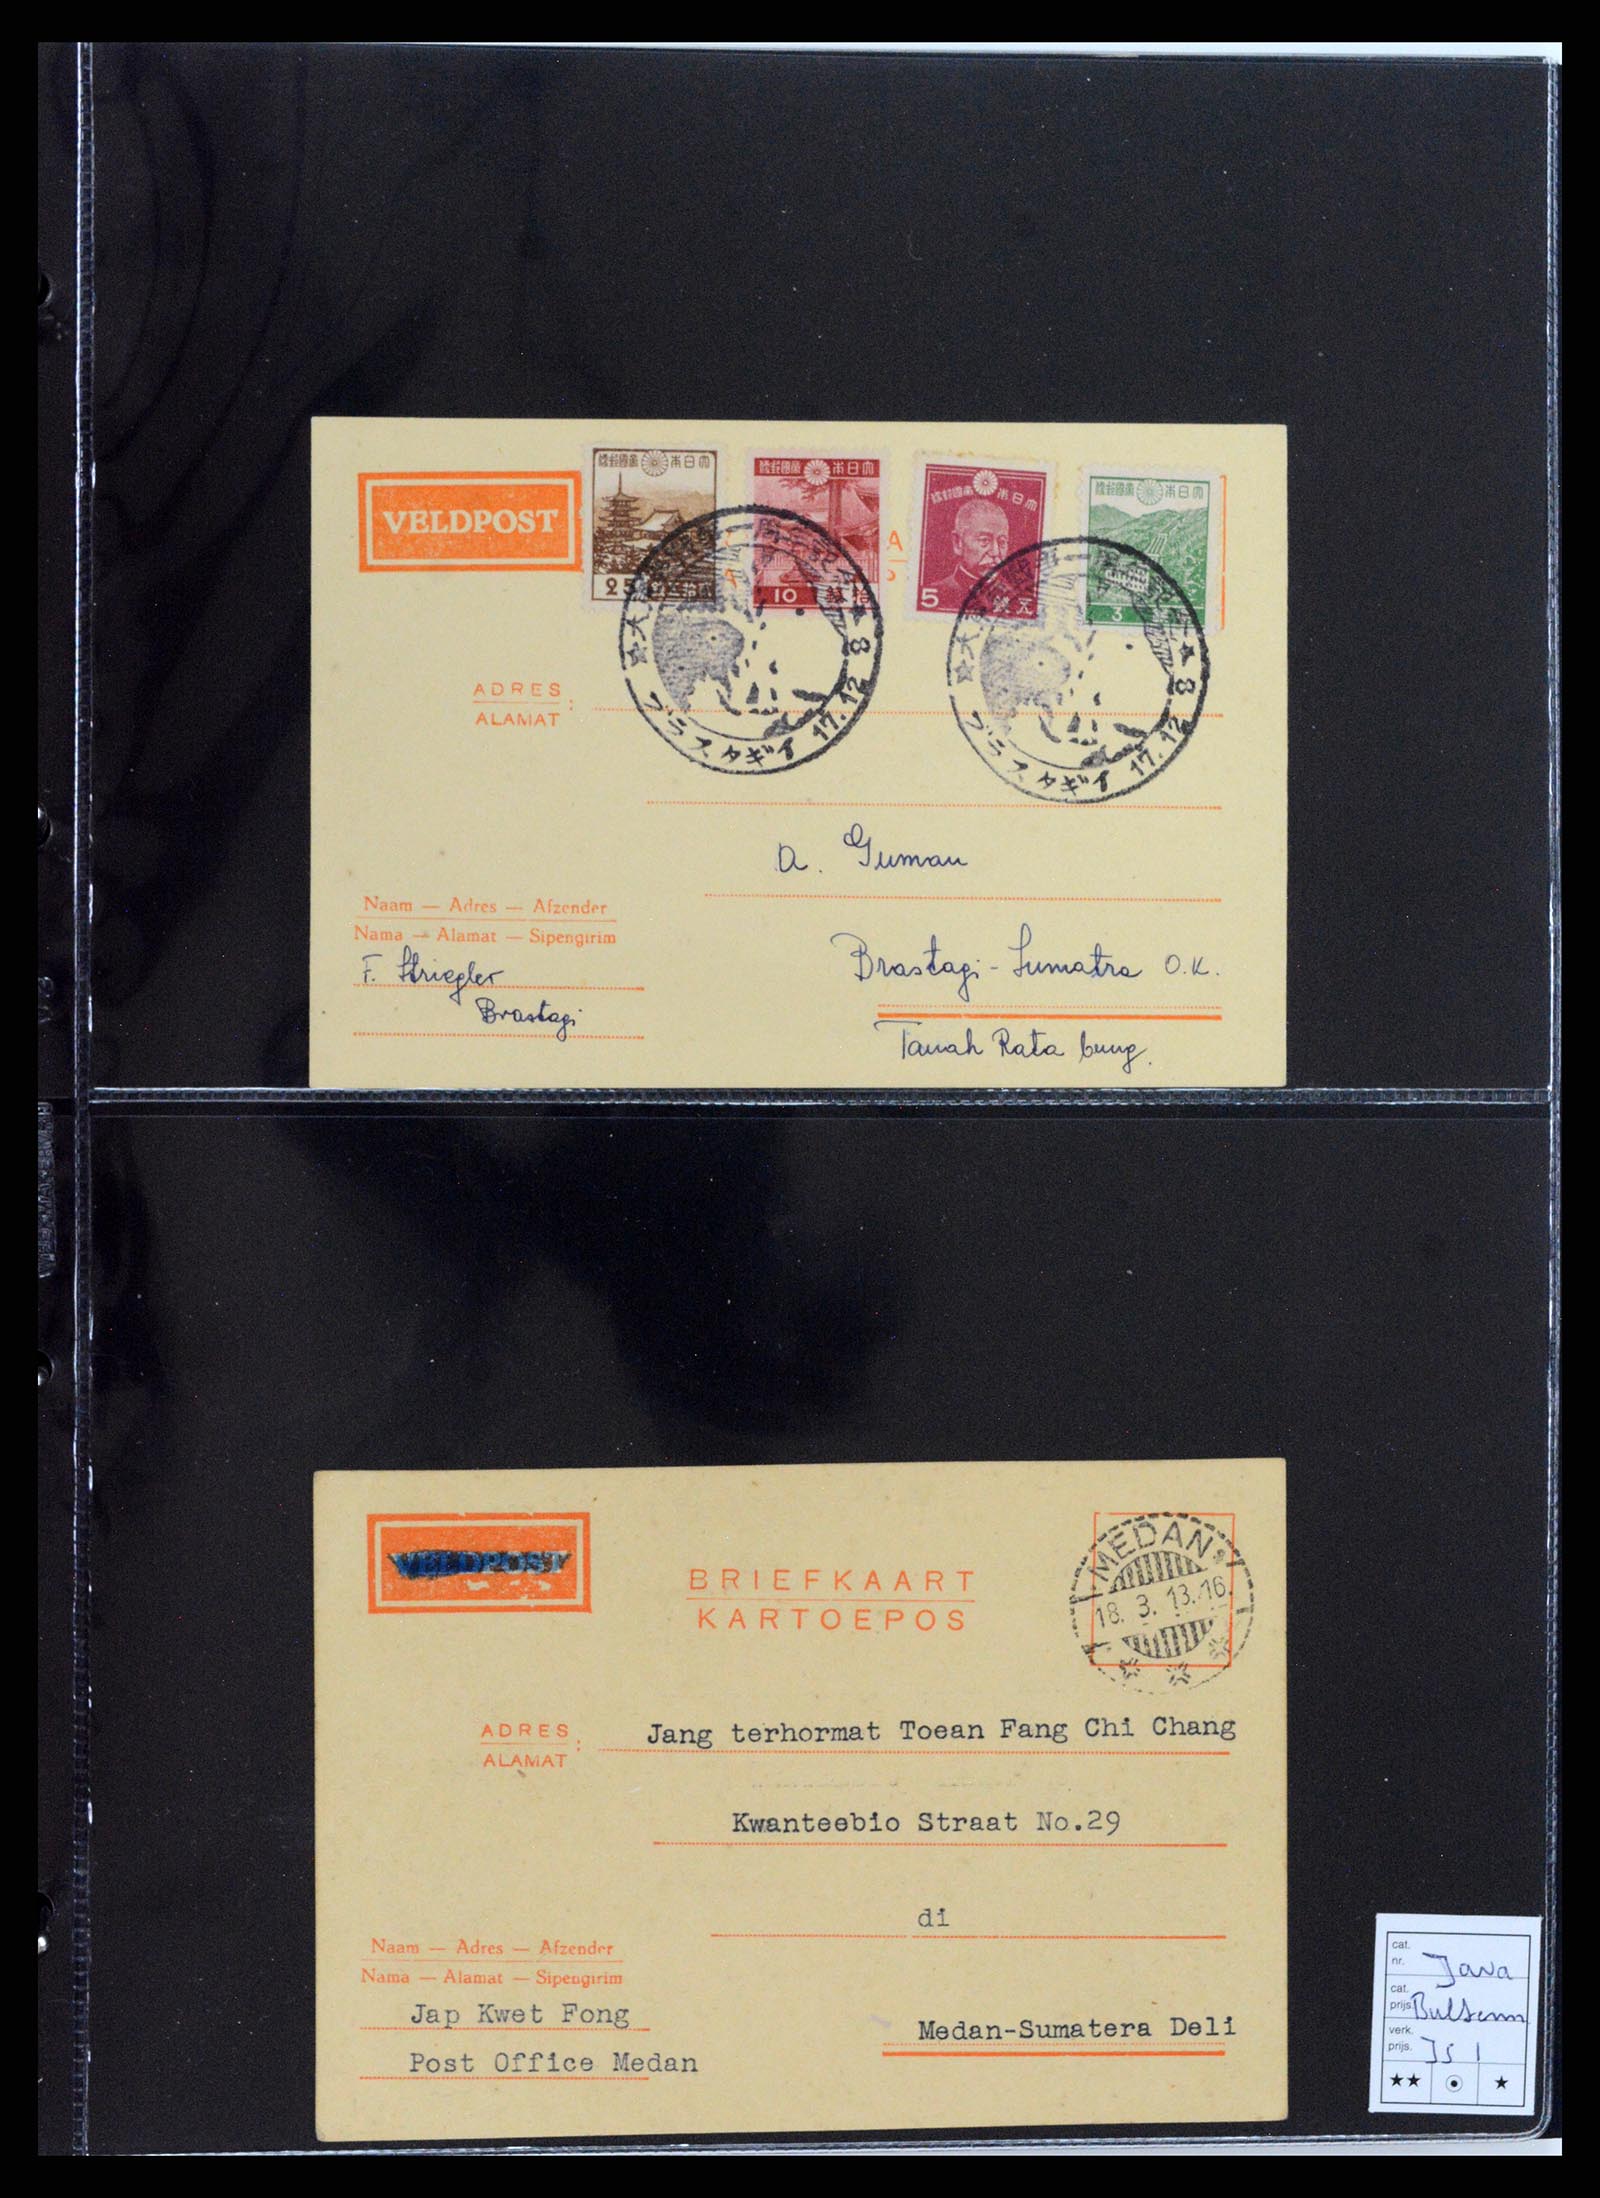 37423 050 - Stamp collection 37423 Dutch Indies Japanese occupation covers 1942-1945